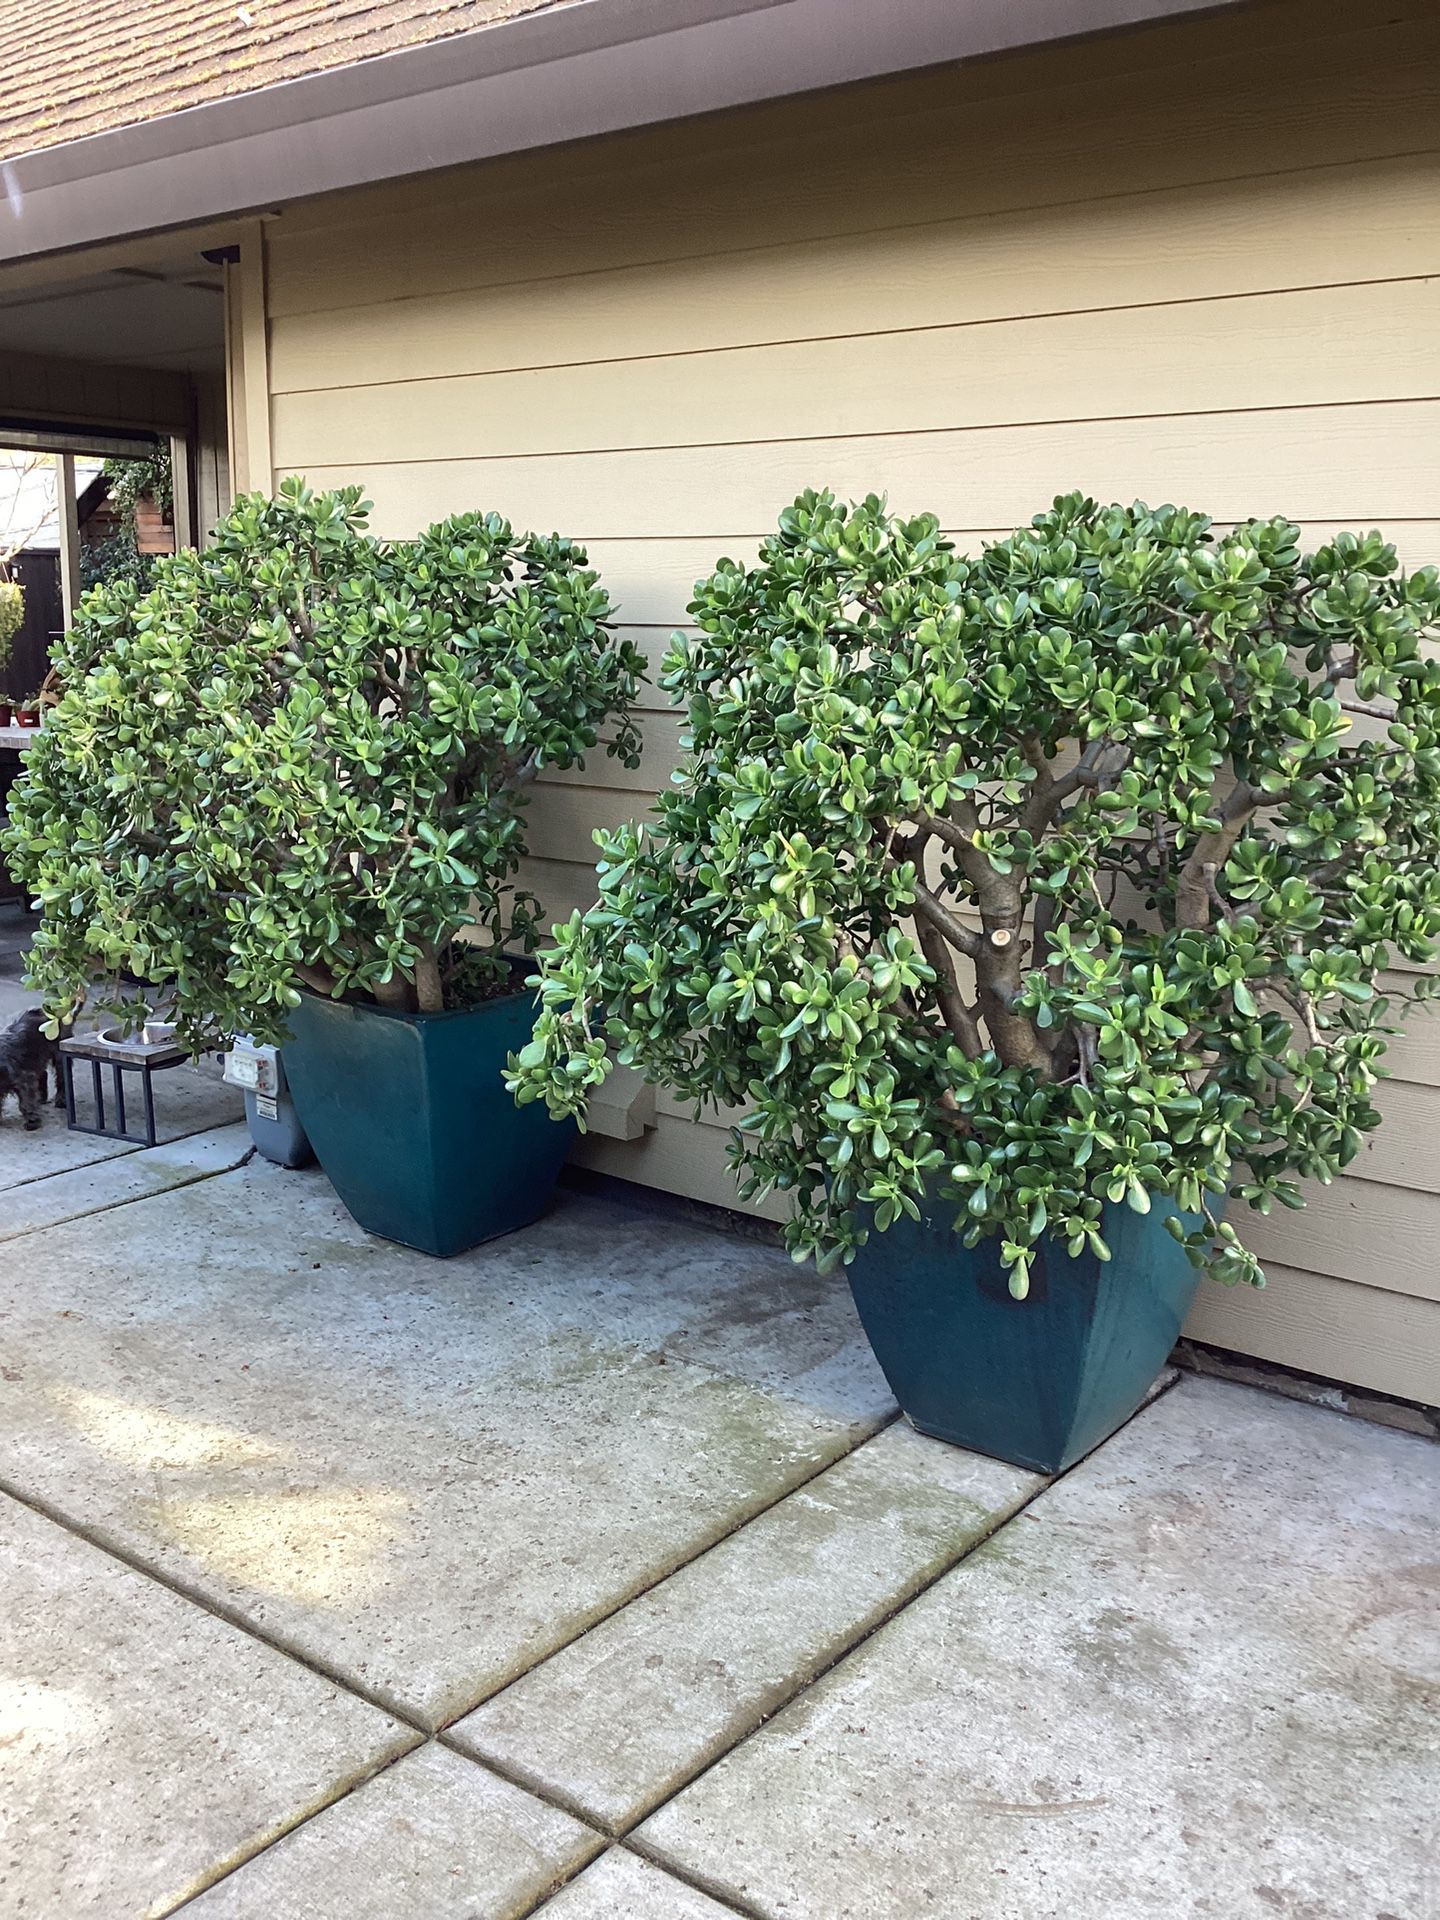 gigantic jade Plant /Lucky plant/money plant in ceramic pots  2 available $500 each 